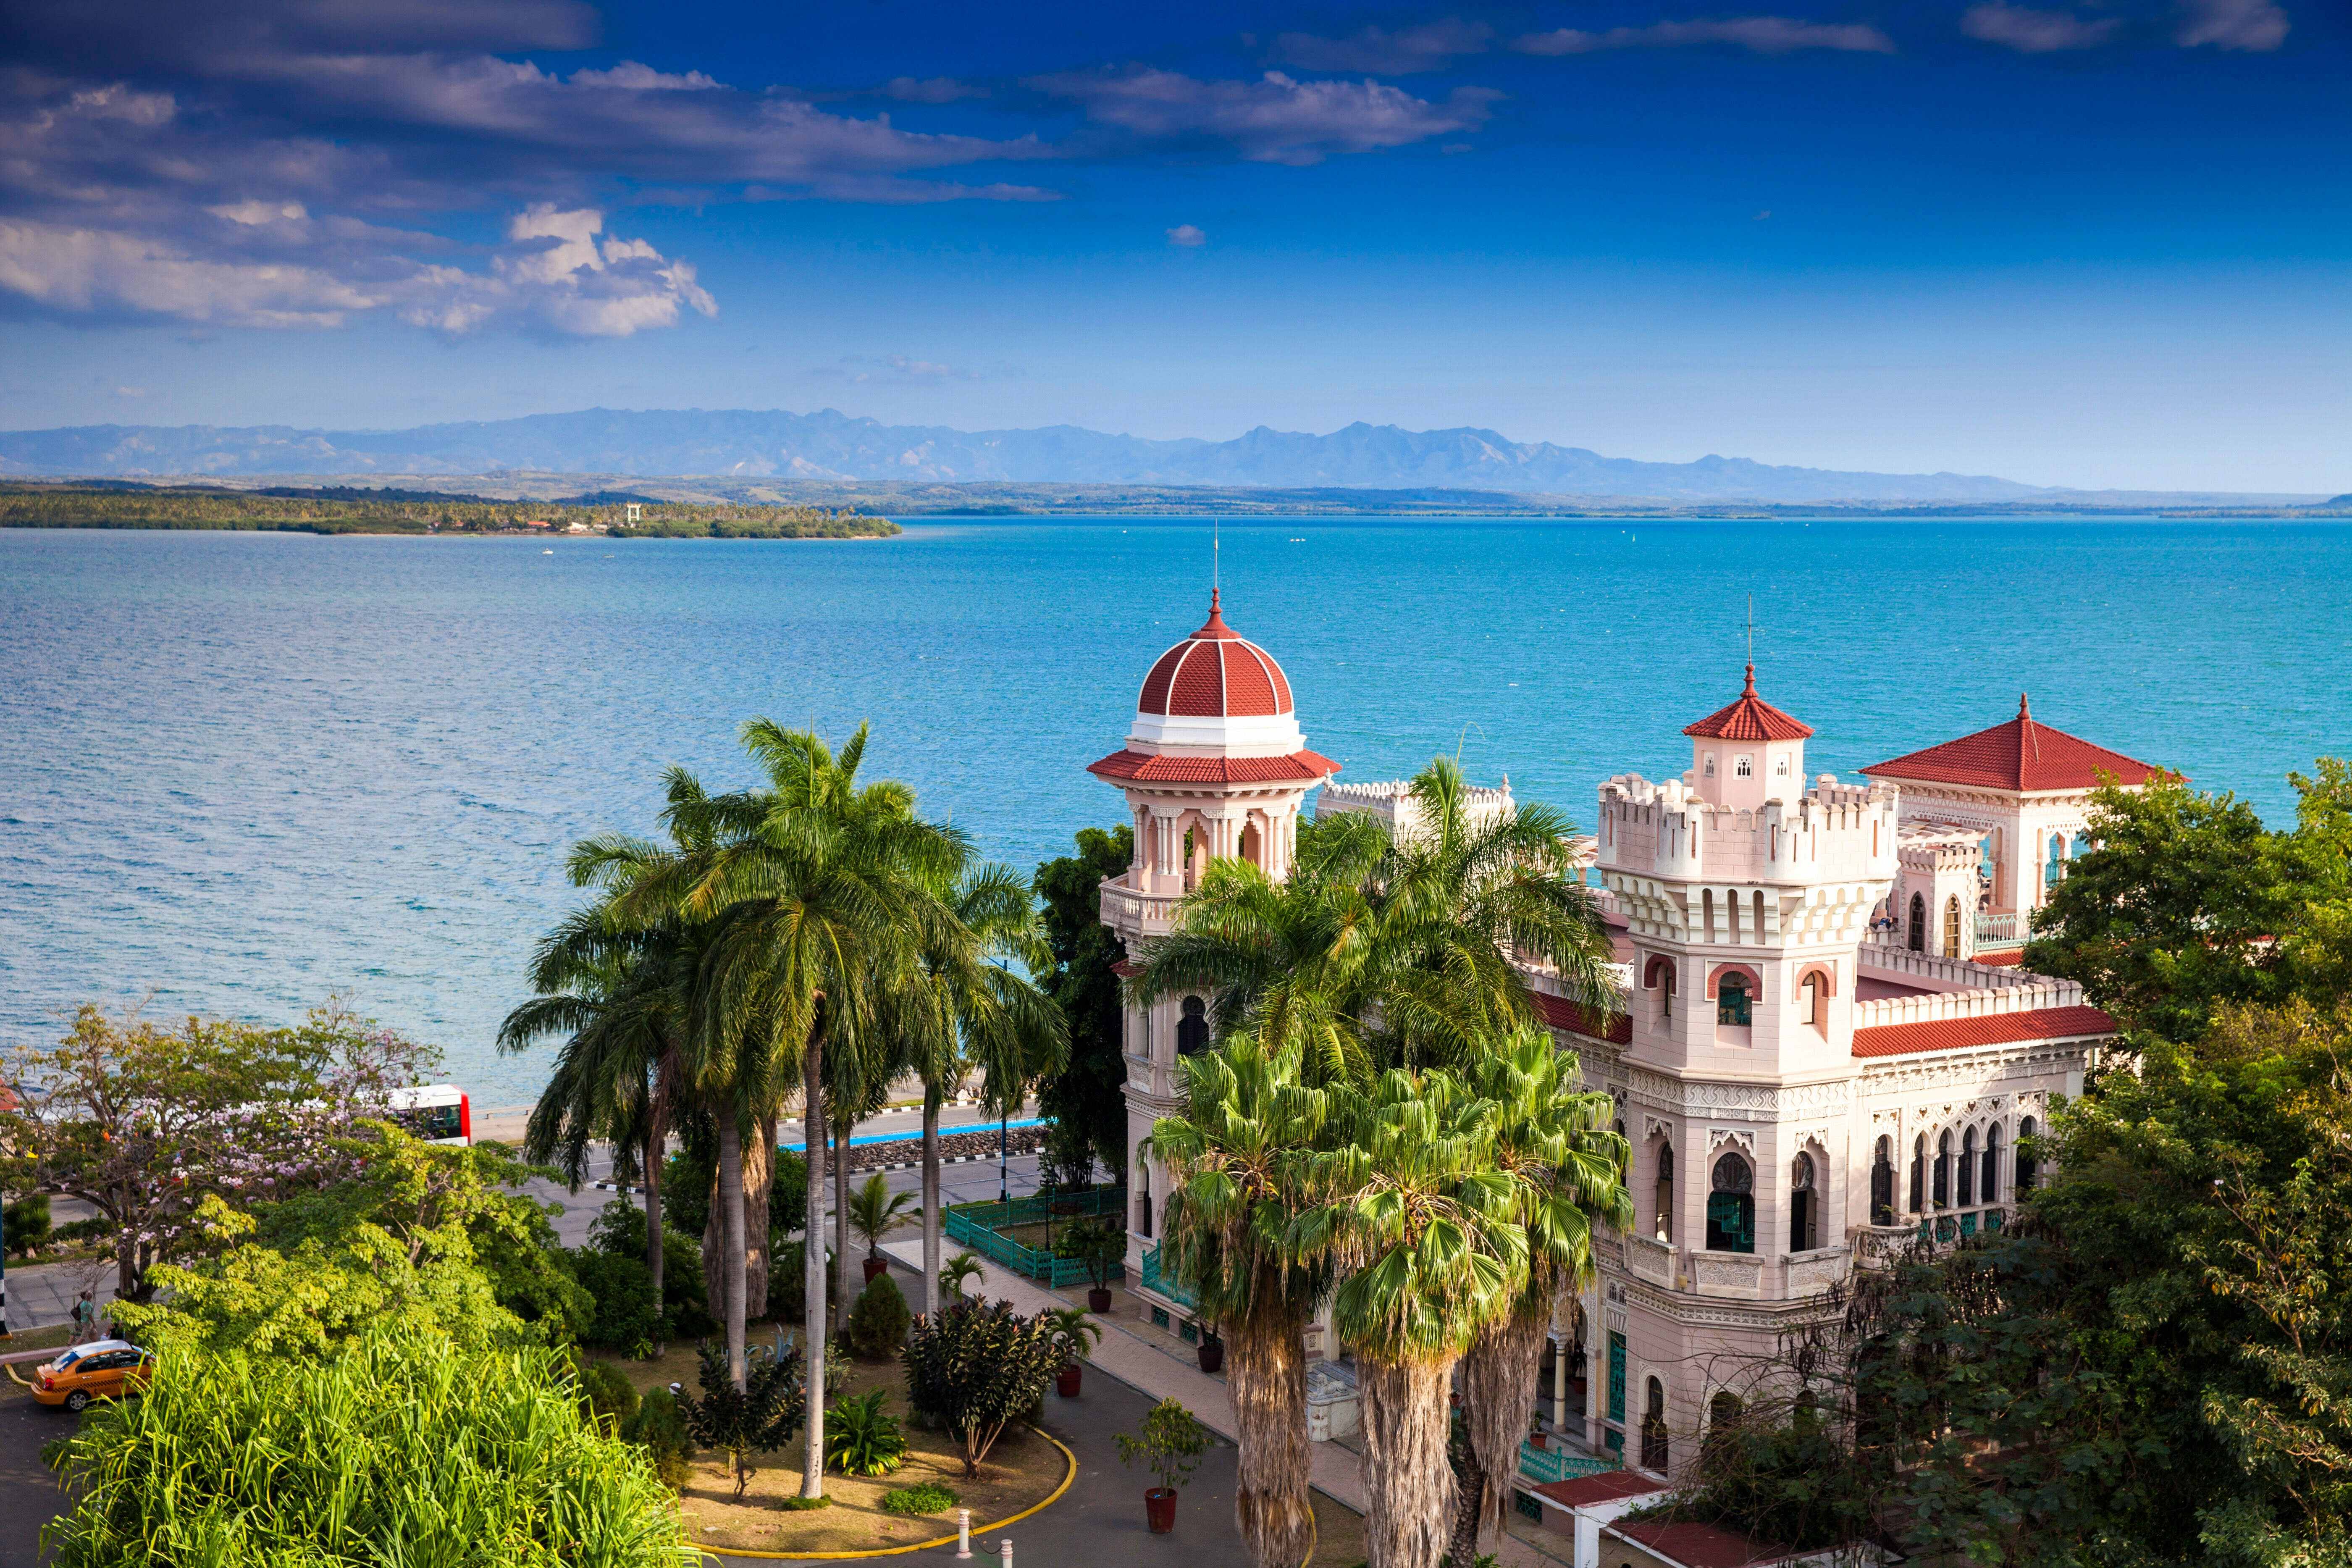 Top 10 Places To Visit In Cuba - Architectural Wonders of Cienfuegos